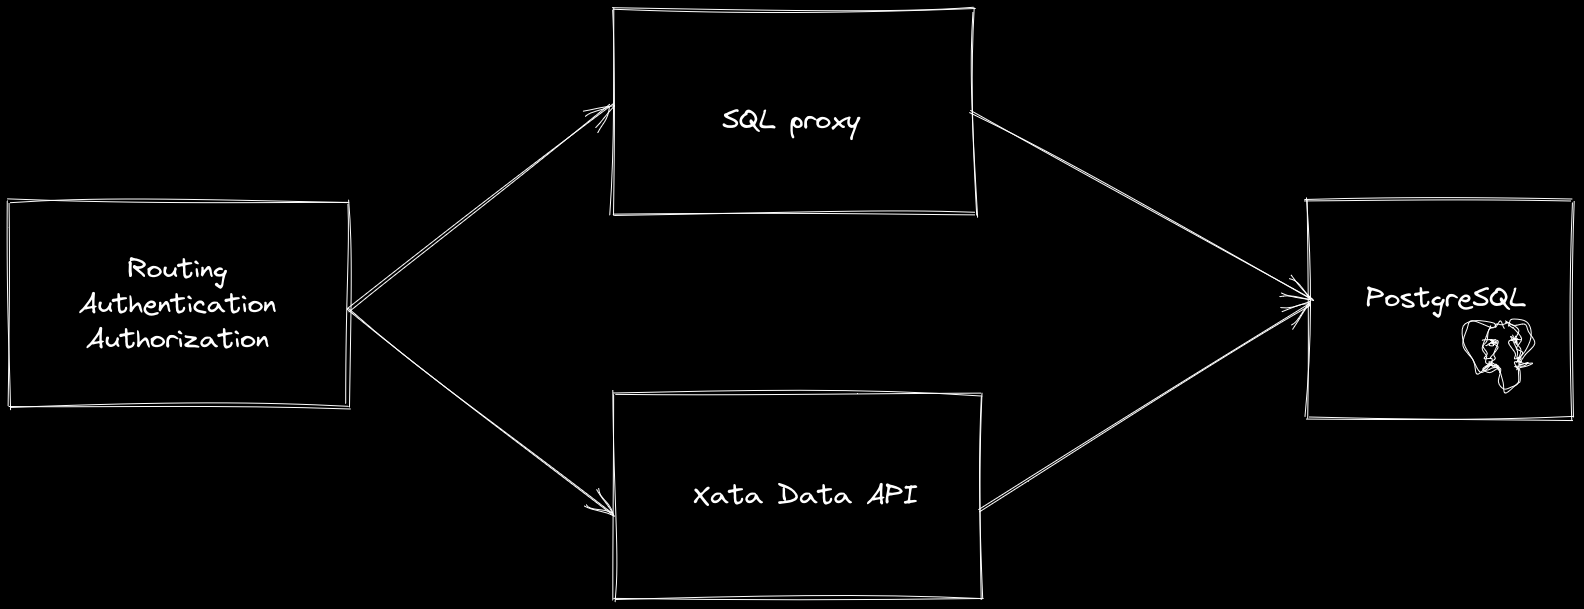 Architecture with the SQL proxy